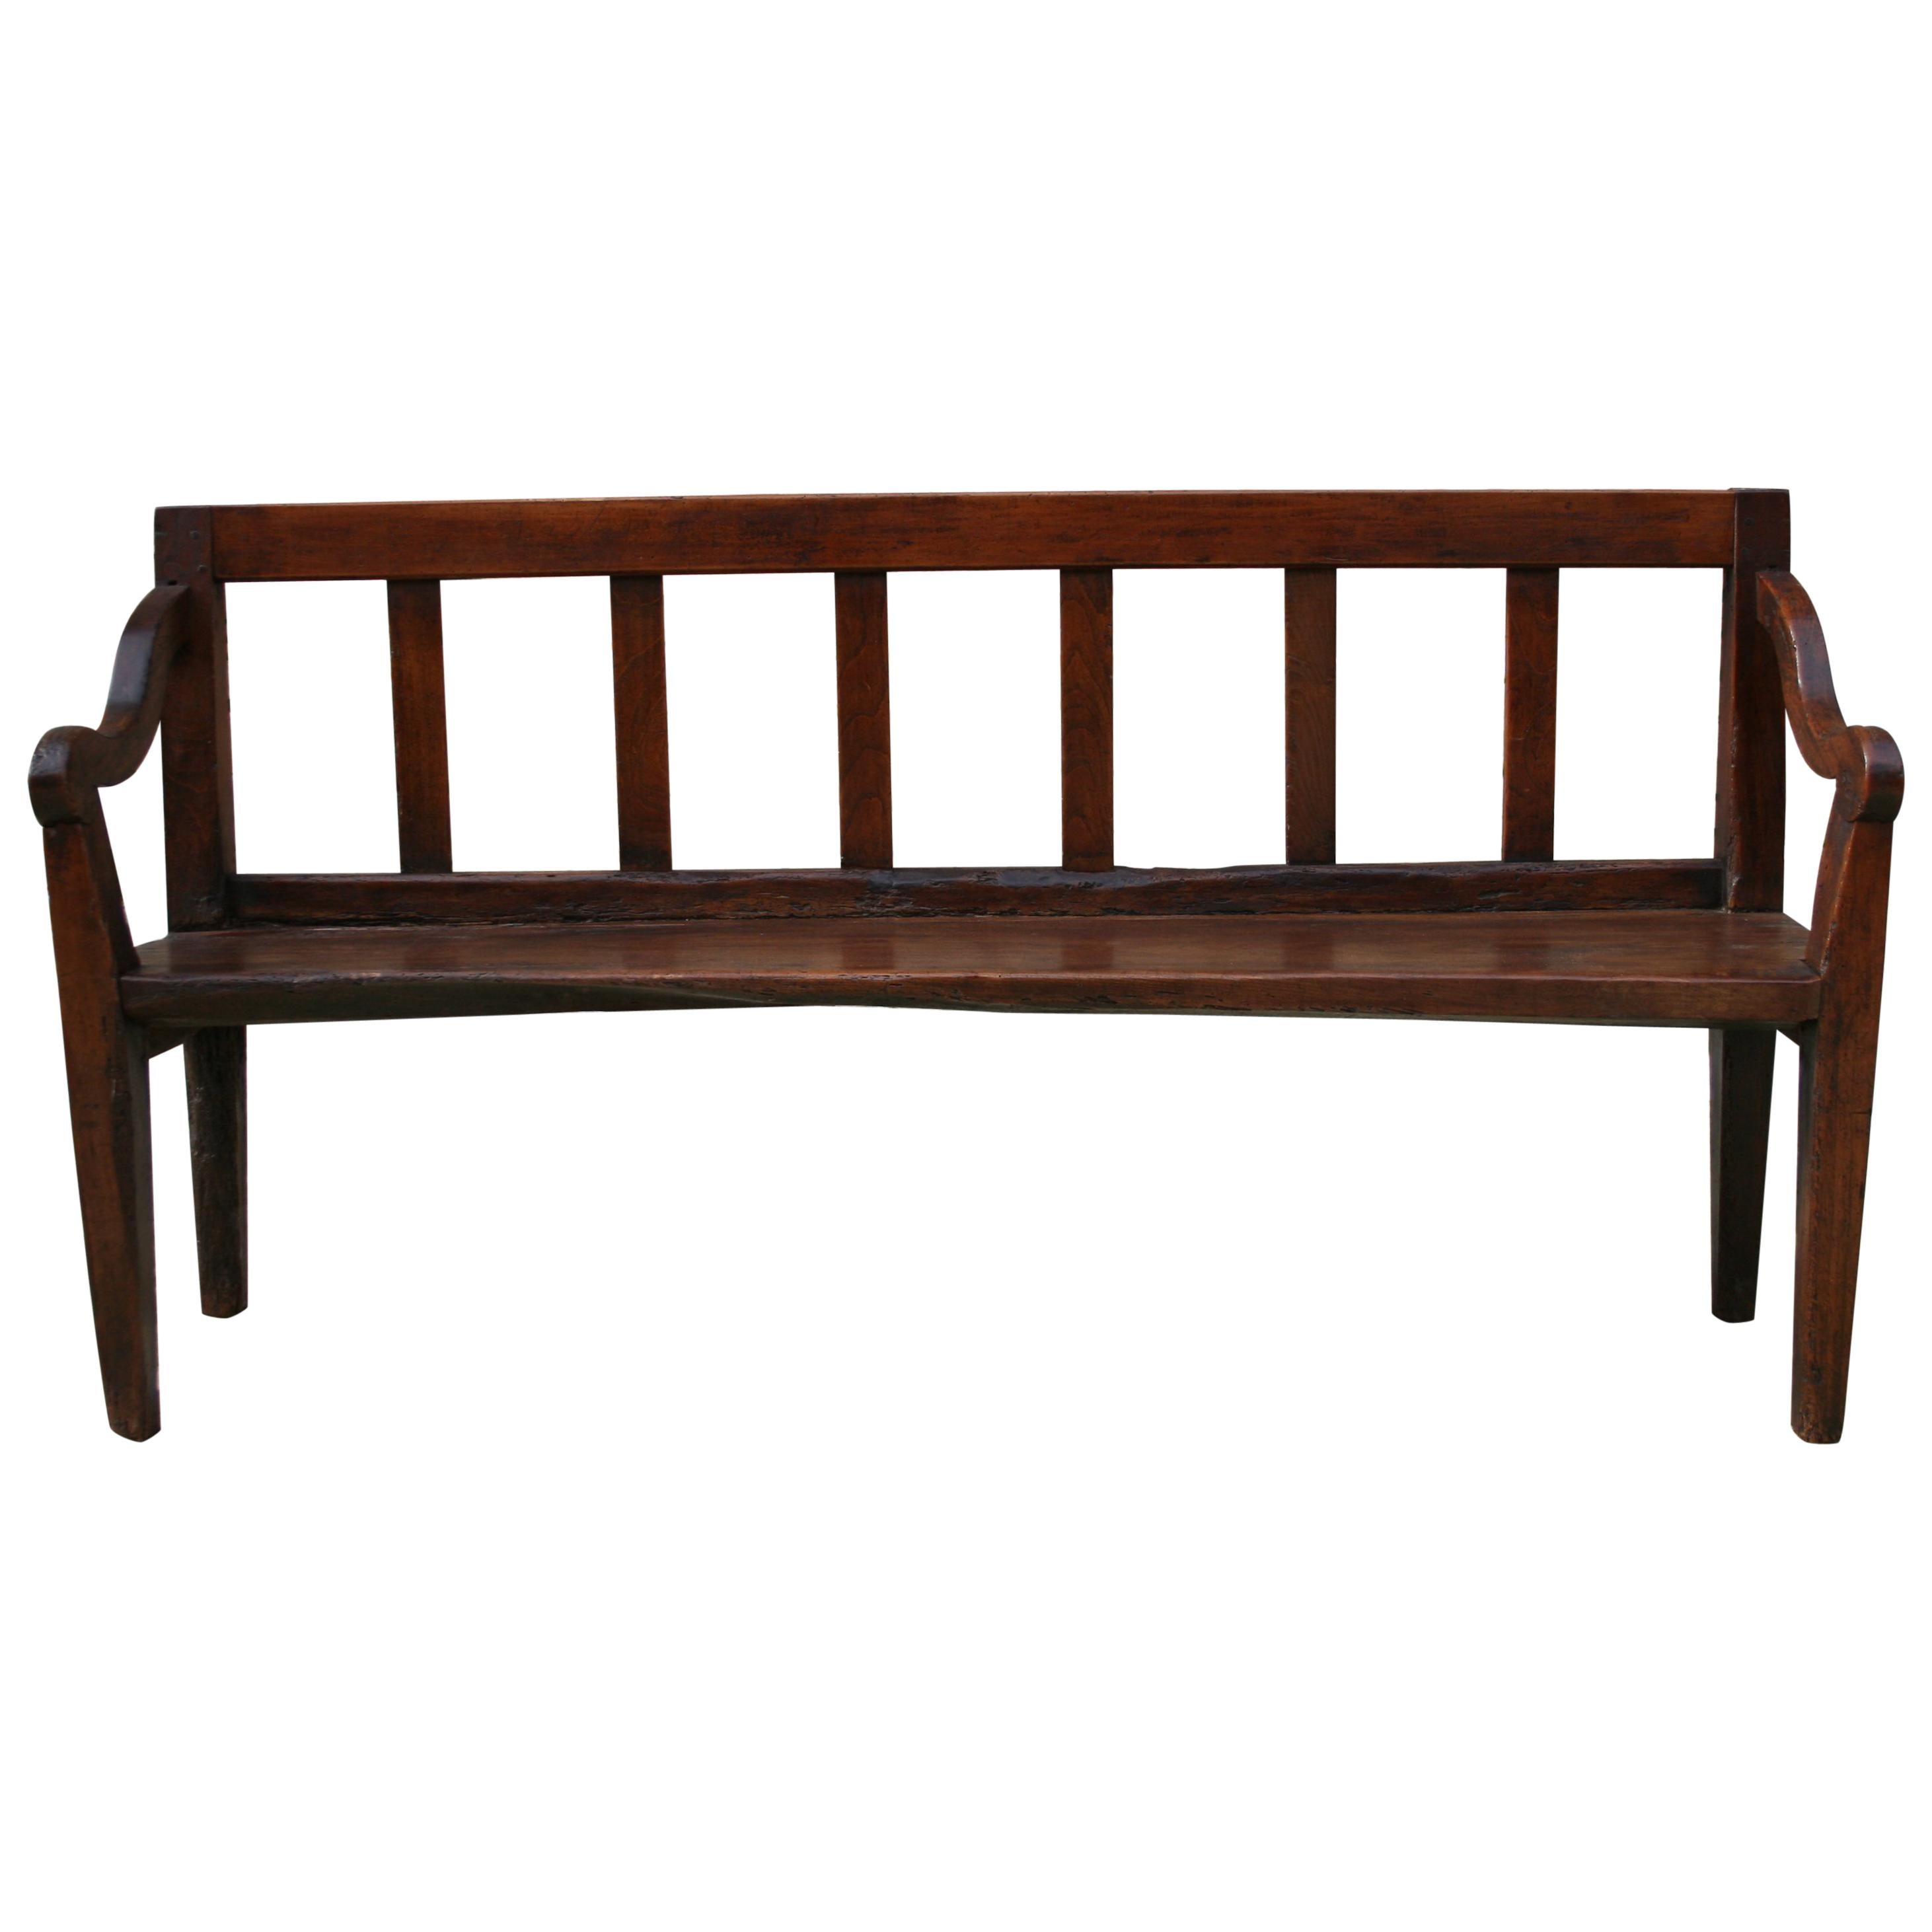 Early 19th Century English Country House Hall Bench in Chestnut and Walnut